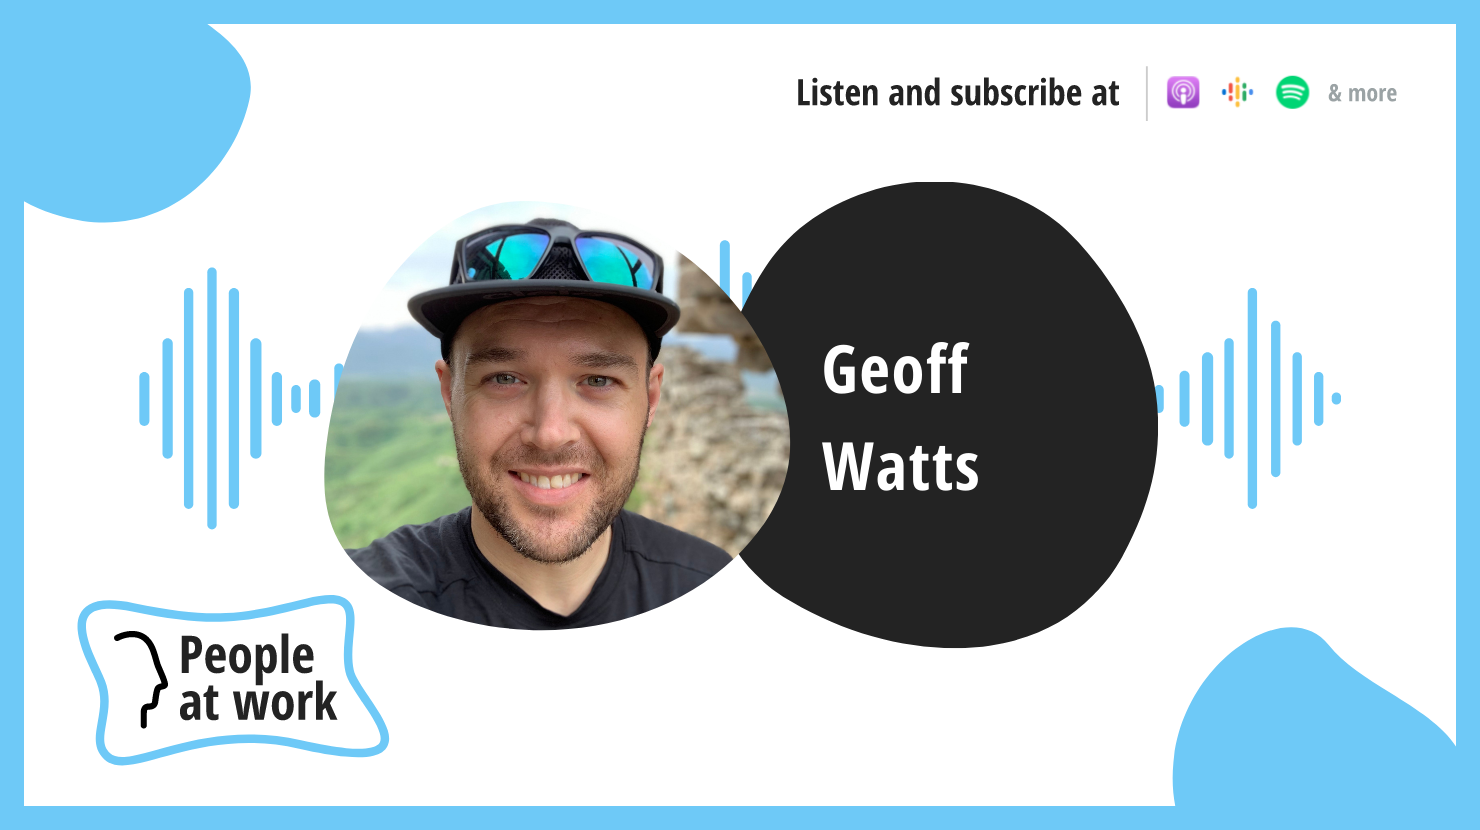 Staying connected in hybrid mode with Geoff Watts